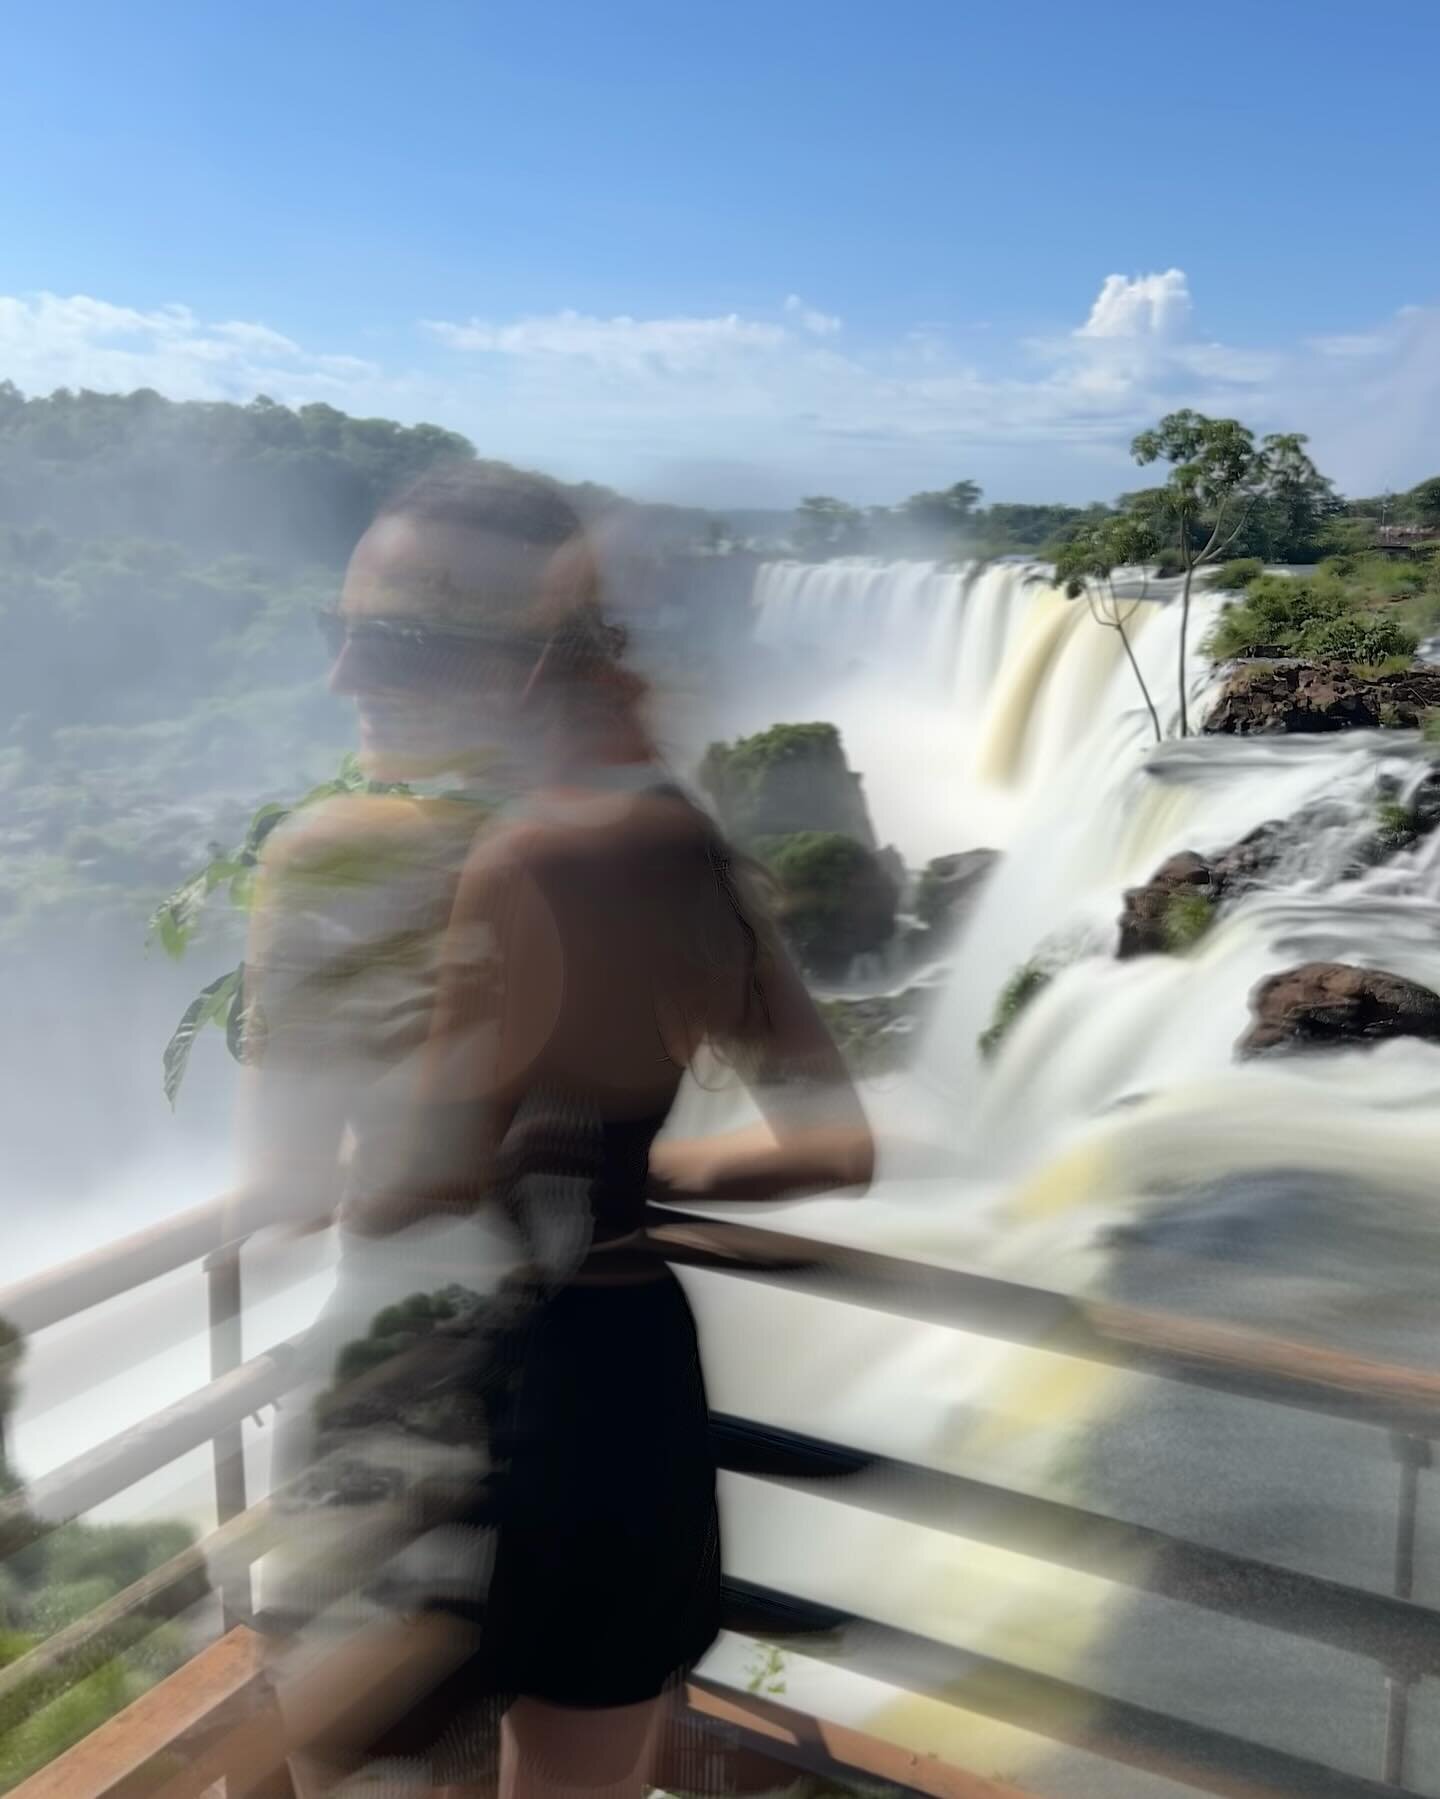 humbling.captivating.cataratas.100%humidity.

I was here 4.5 years ago and this time was just as in awe as back then. I could look at the water falling down for hours, it&rsquo;s so vast it&rsquo;s really humbling, I felt like I was just a little dro